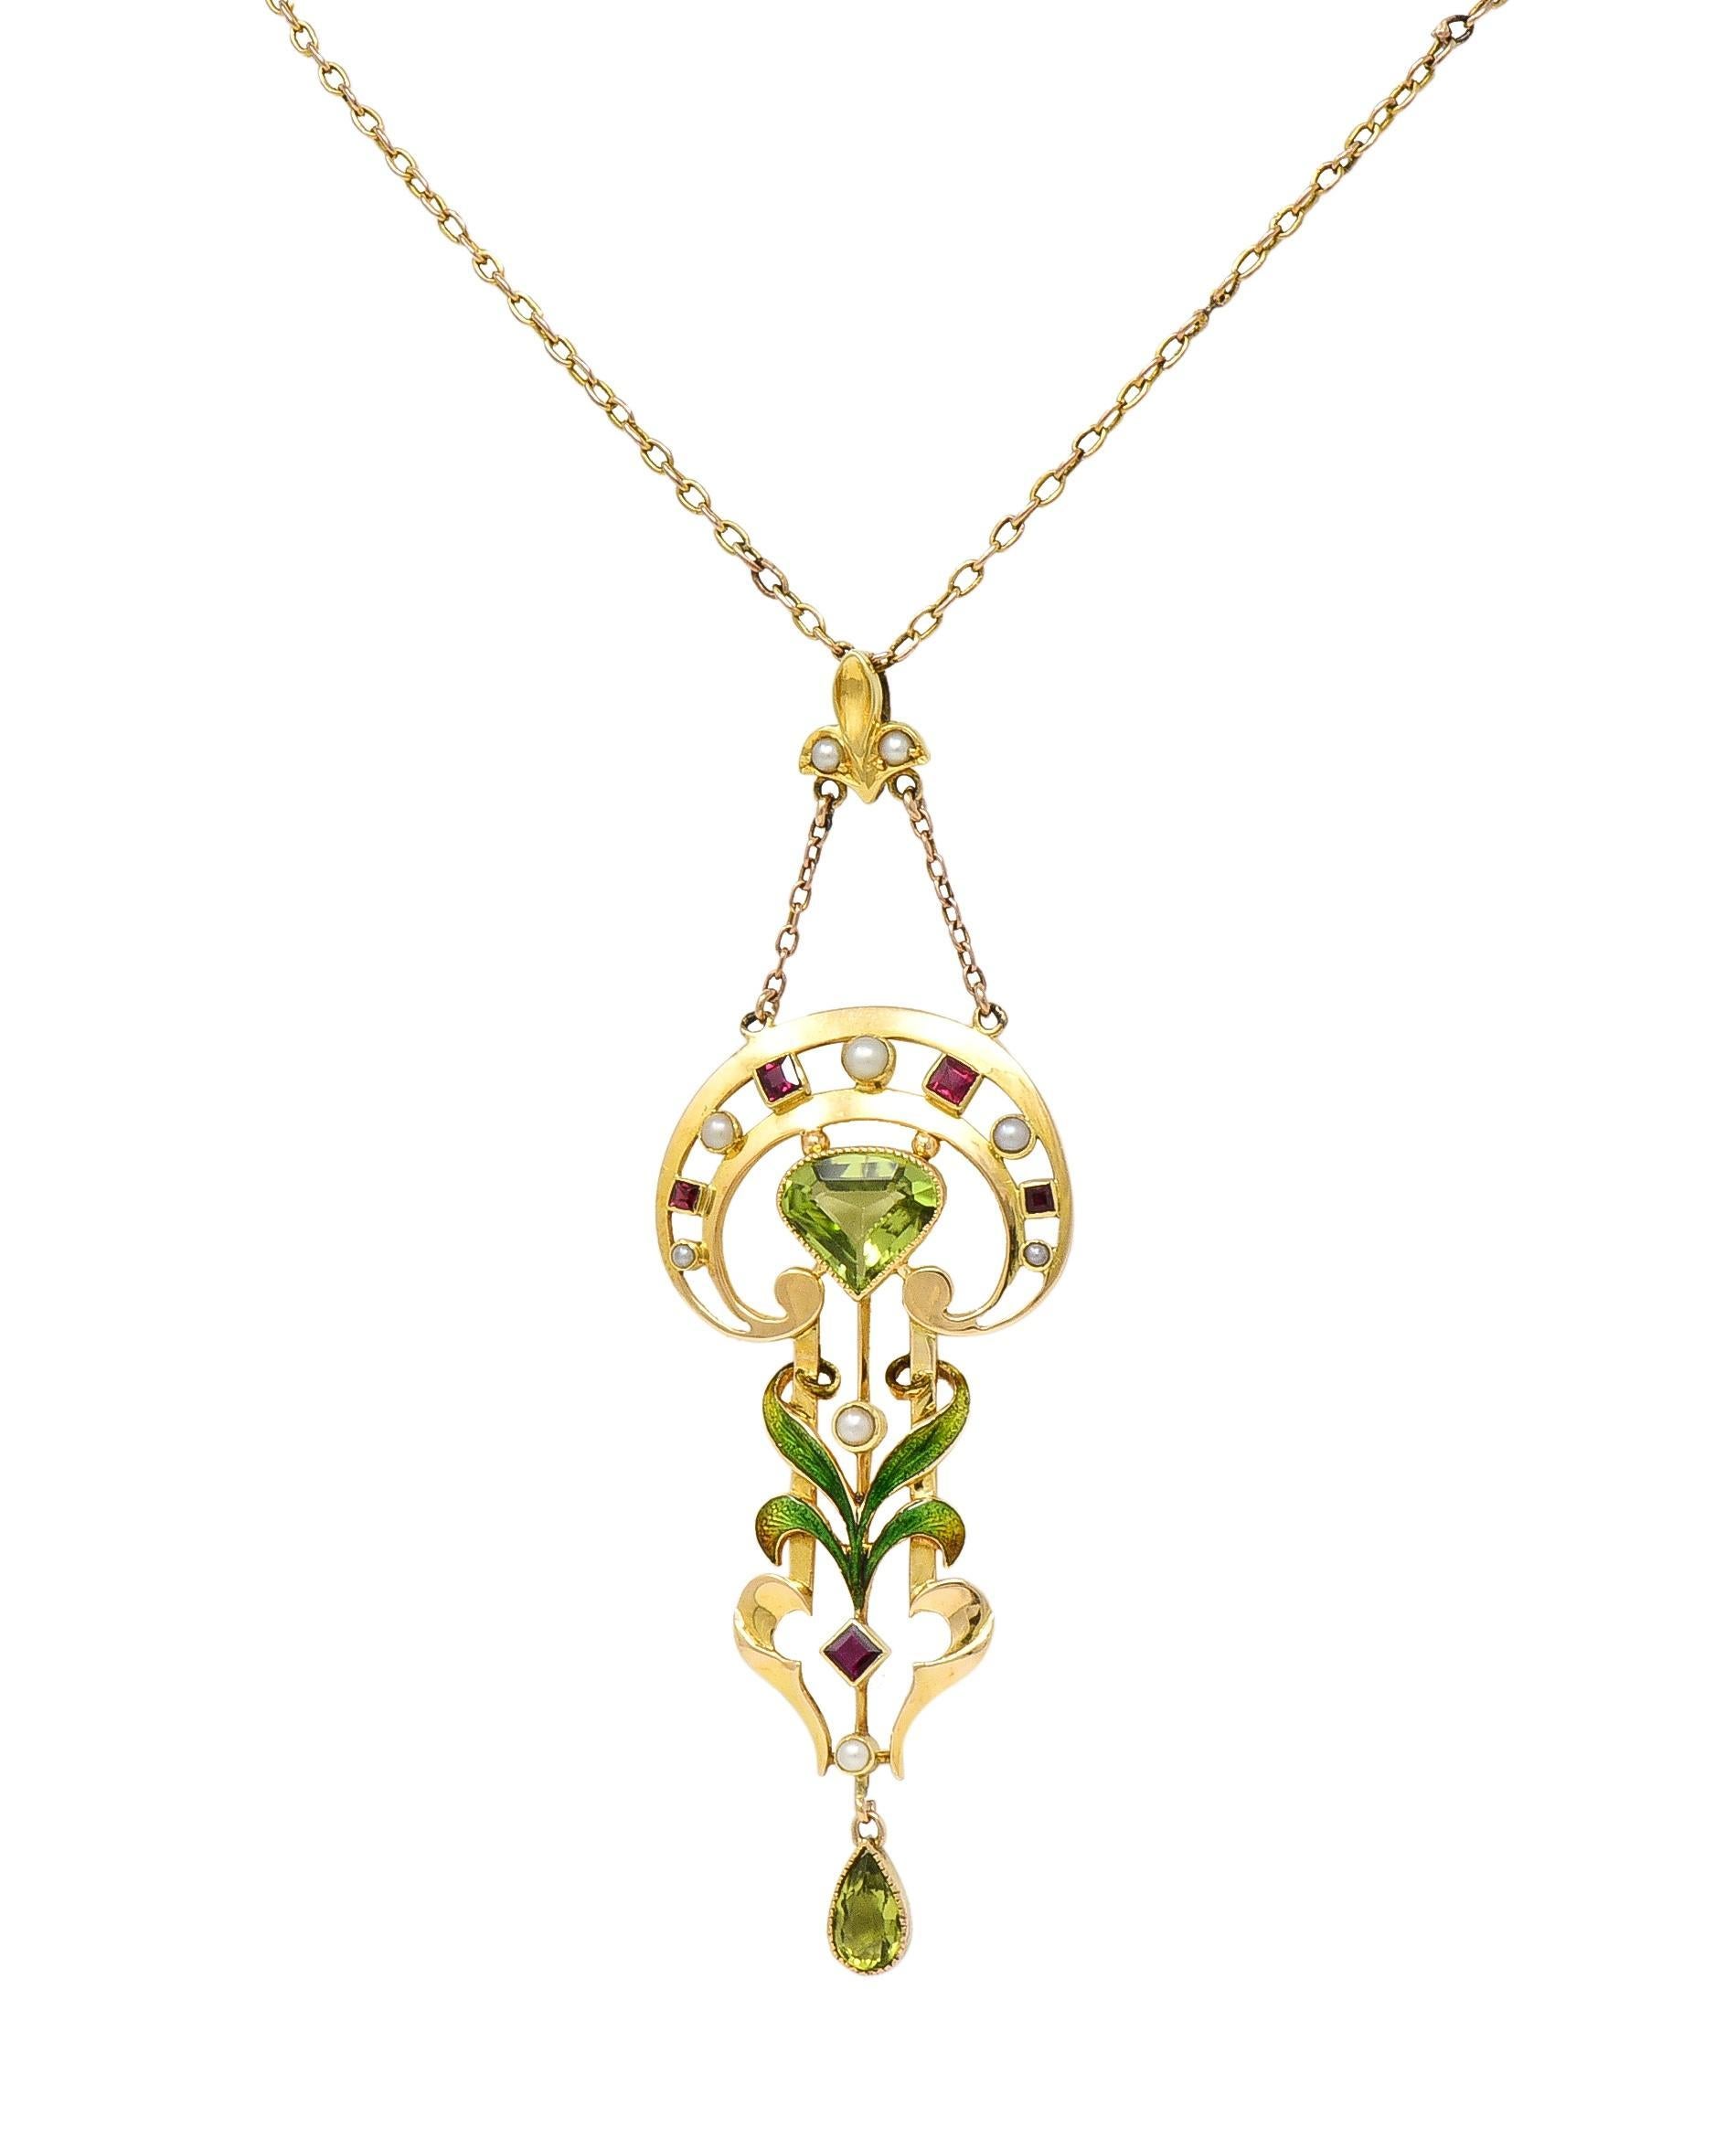 Designed as a cable link chain suspending a pendant from a fleur-de-lis motif bale
Suspending a pierced shield form chain and centering a pentagonal cut peridot 
Weighing approximately 1.50 carats - transparent yellowish green in color 
Well matched